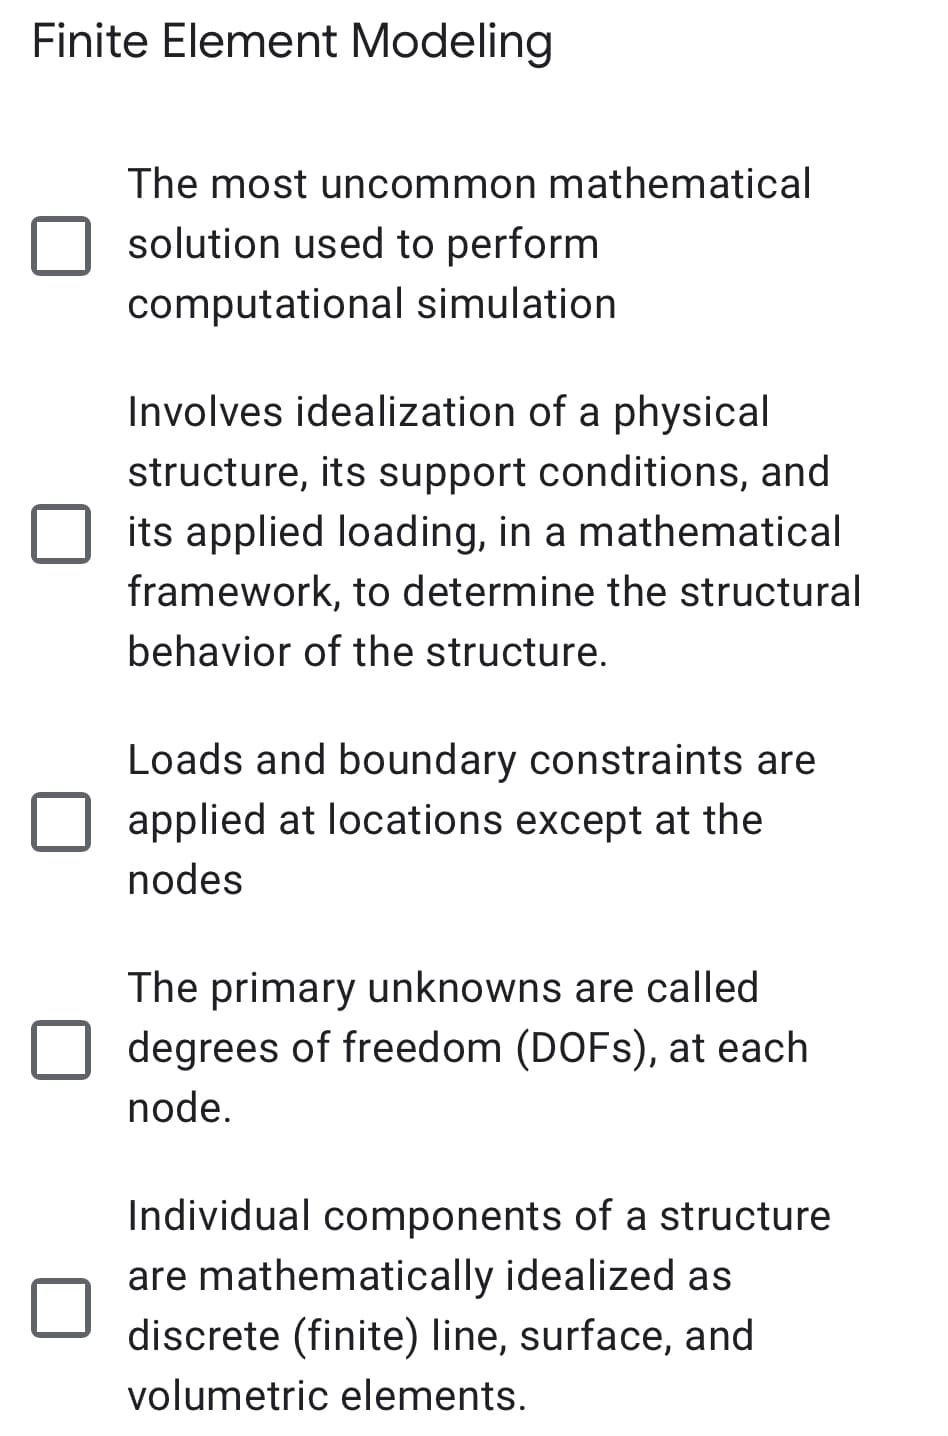 Finite Element Modeling
The most uncommon mathematical
solution used to perform
computational simulation
Involves idealization of a physical
structure, its support conditions, and
its applied loading, in a mathematical
framework, to determine the structural
behavior of the structure.
Loads and boundary constraints are
applied at locations except at the
nodes
The primary unknowns are called
degrees of freedom (DOFS), at each
node.
Individual components of a structure
are mathematically idealized as
discrete (finite) line, surface, and
volumetric elements.
